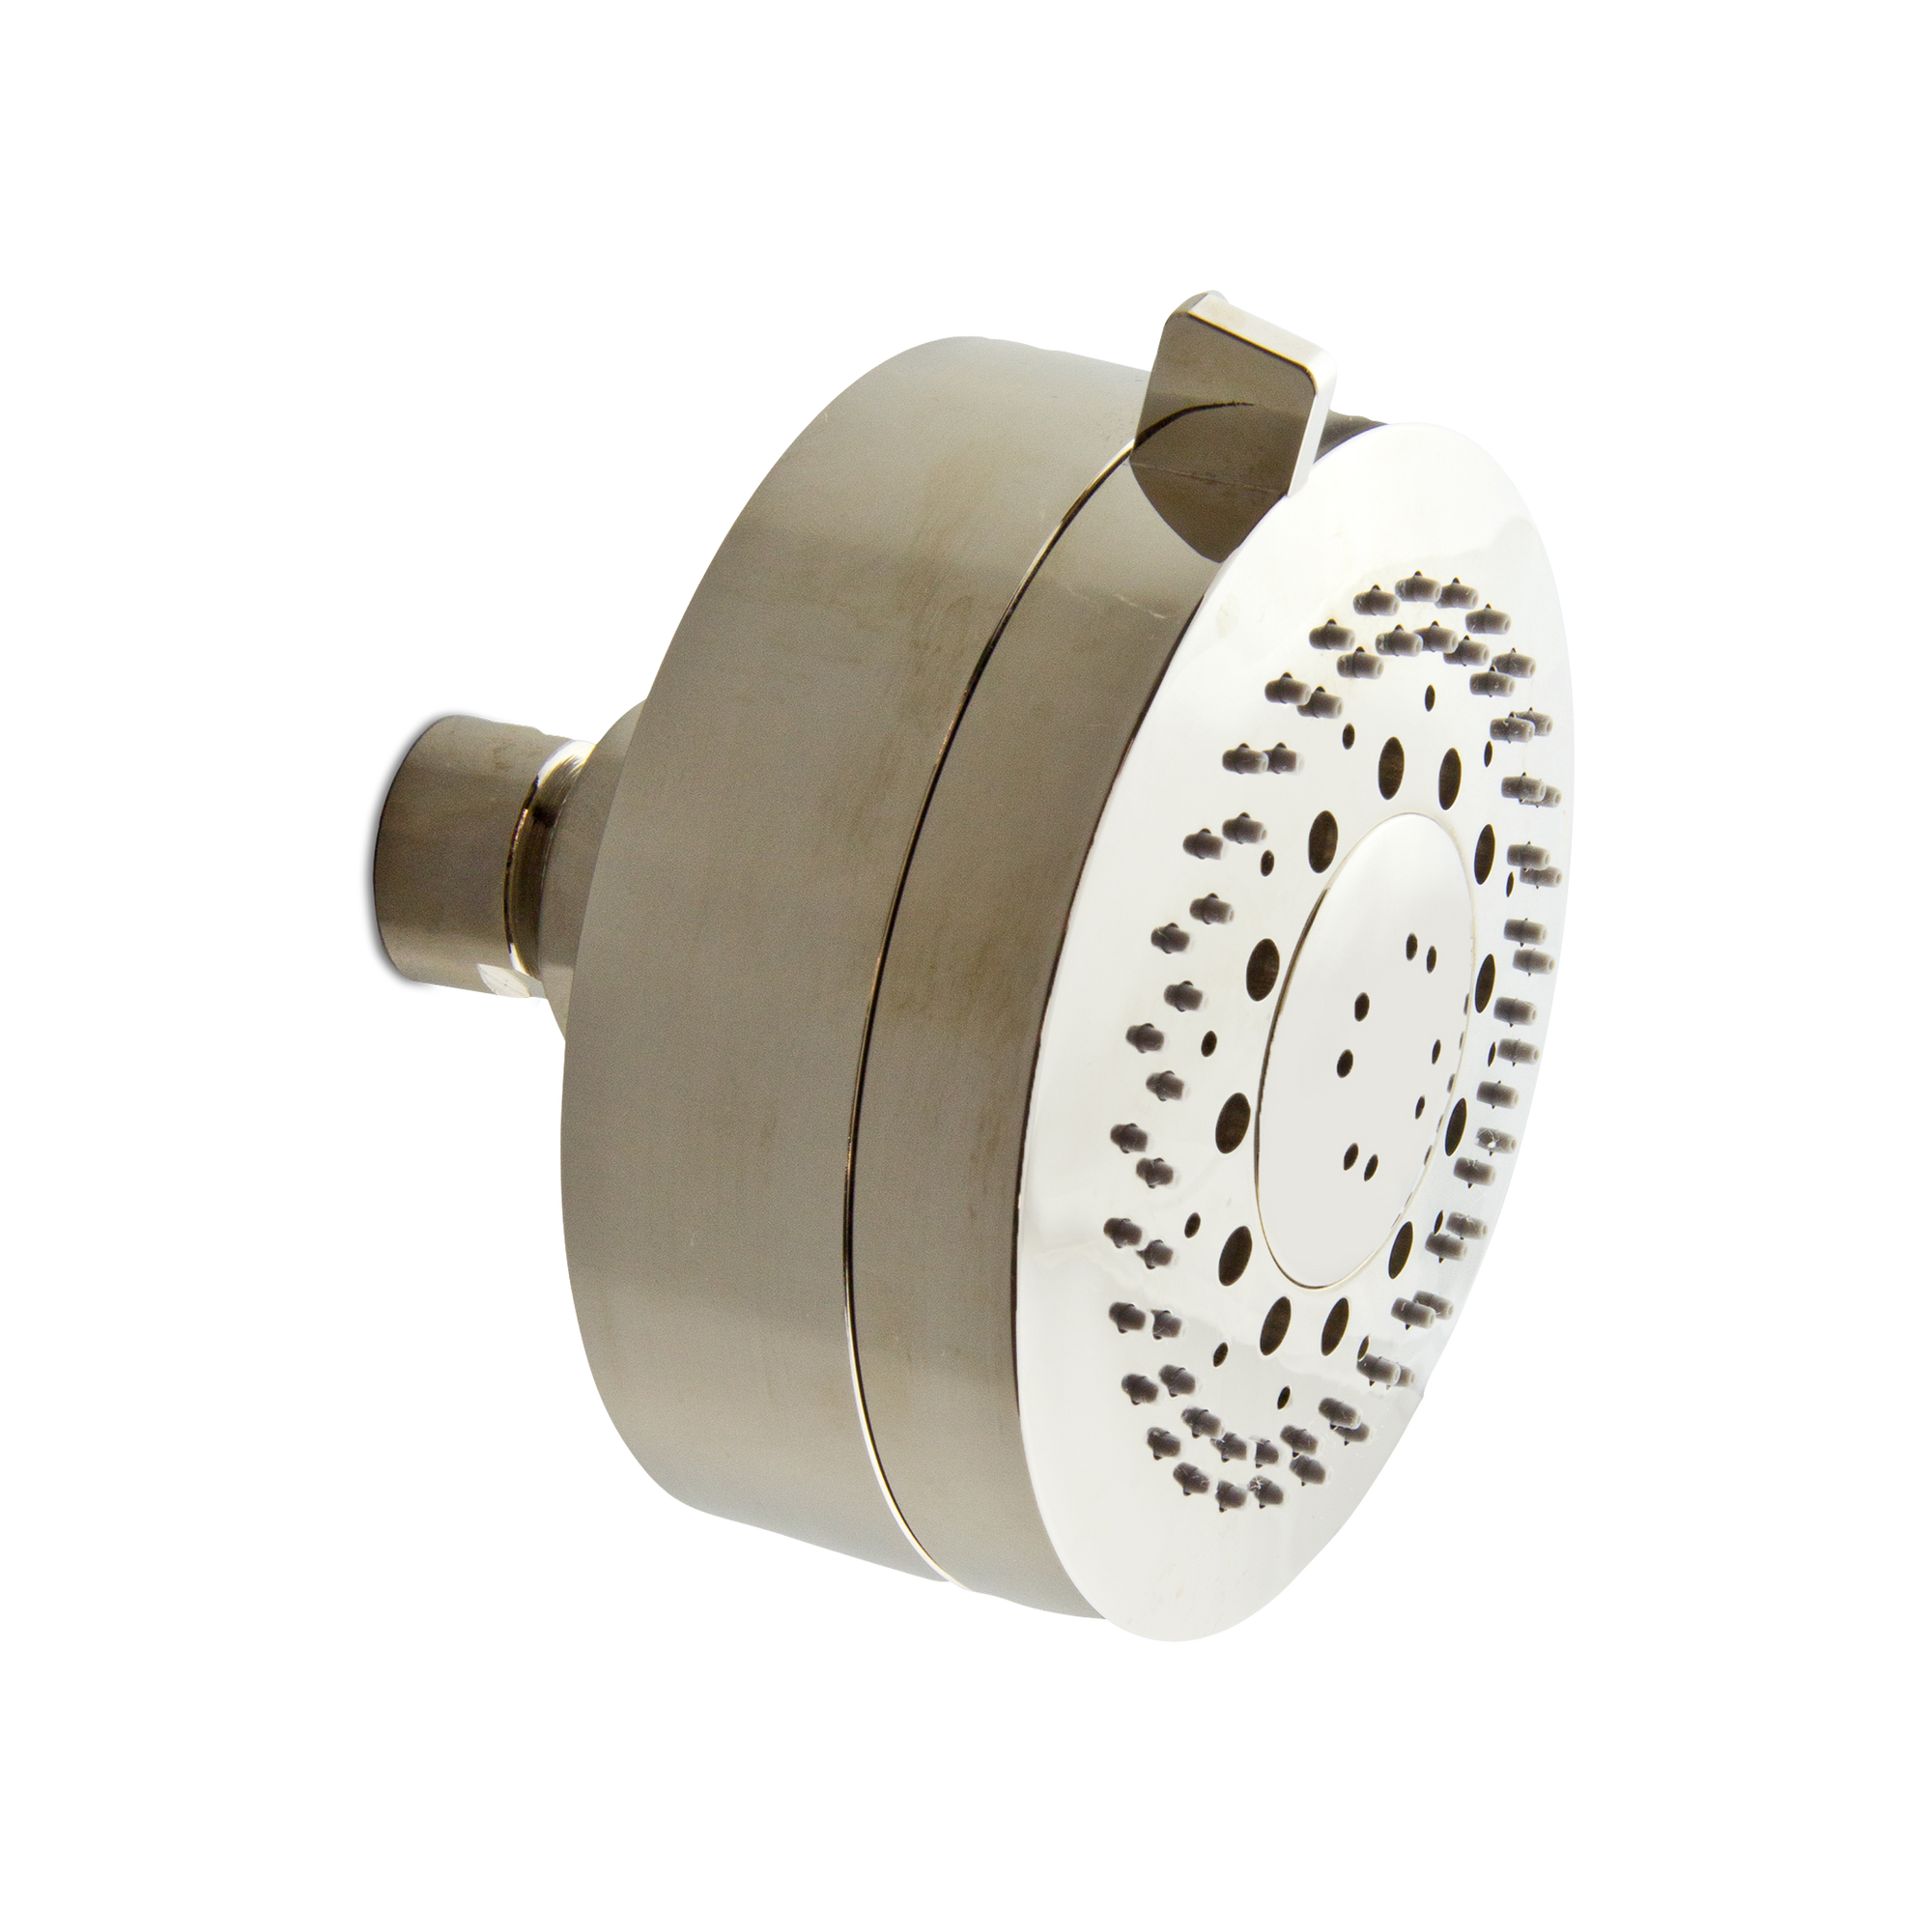 The Keira Shower Head has three spray patterns and EasyClean rubber nozzles.